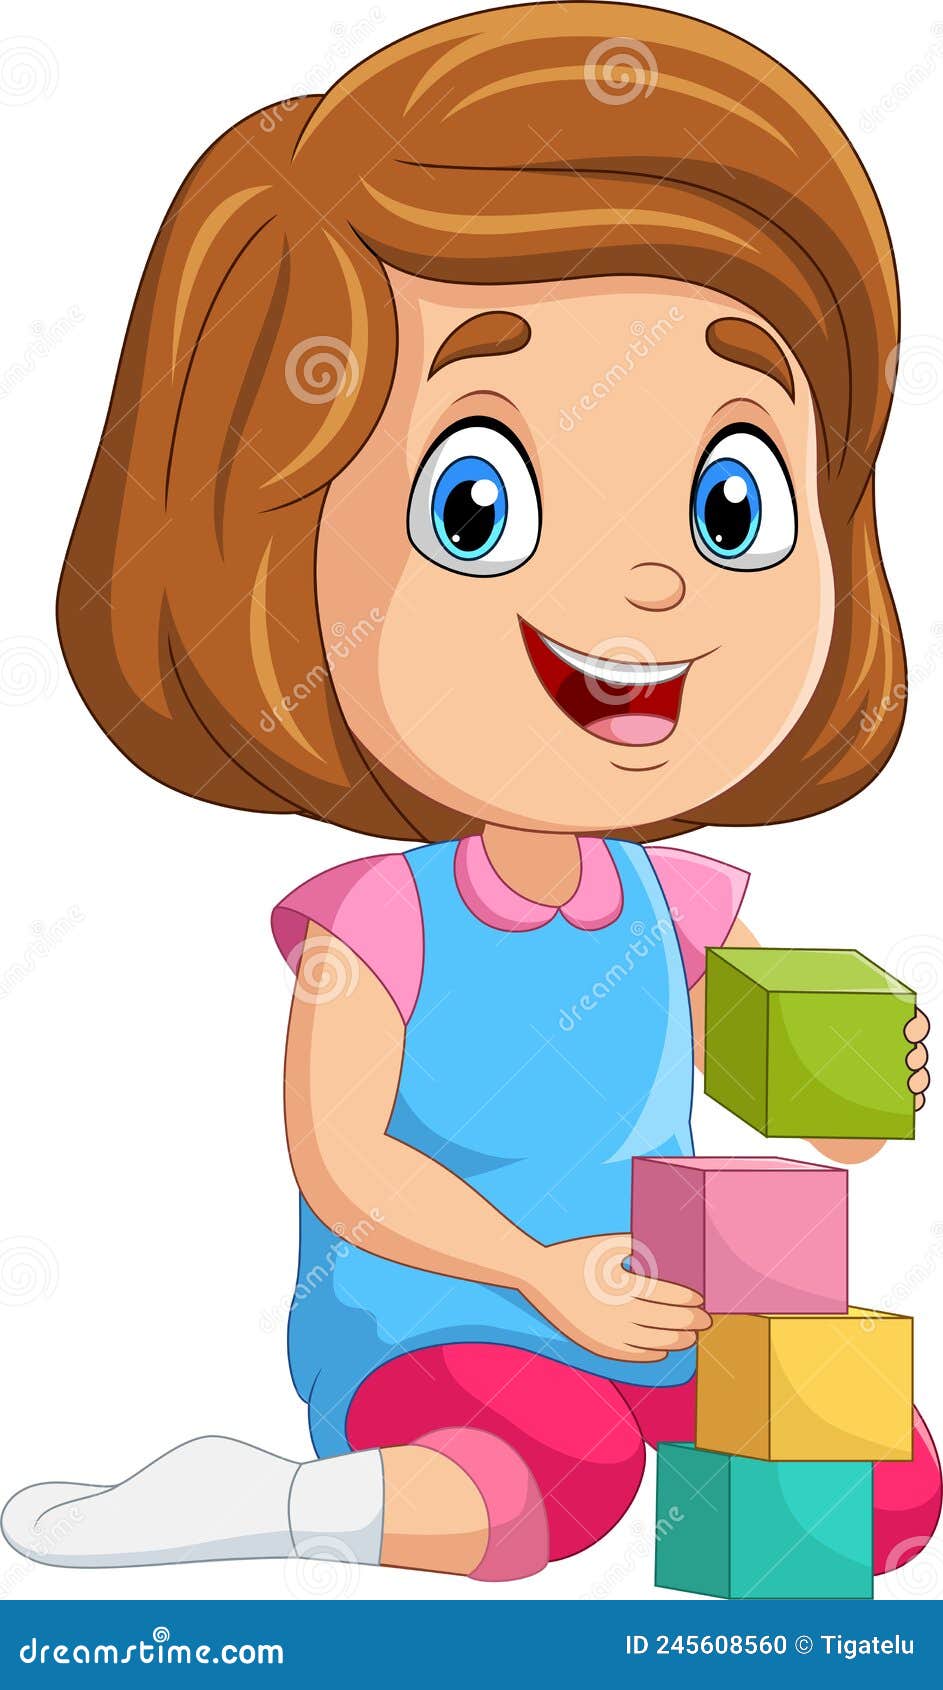 Cartoon Little Girl Playing with Building Blocks Stock Vector ...